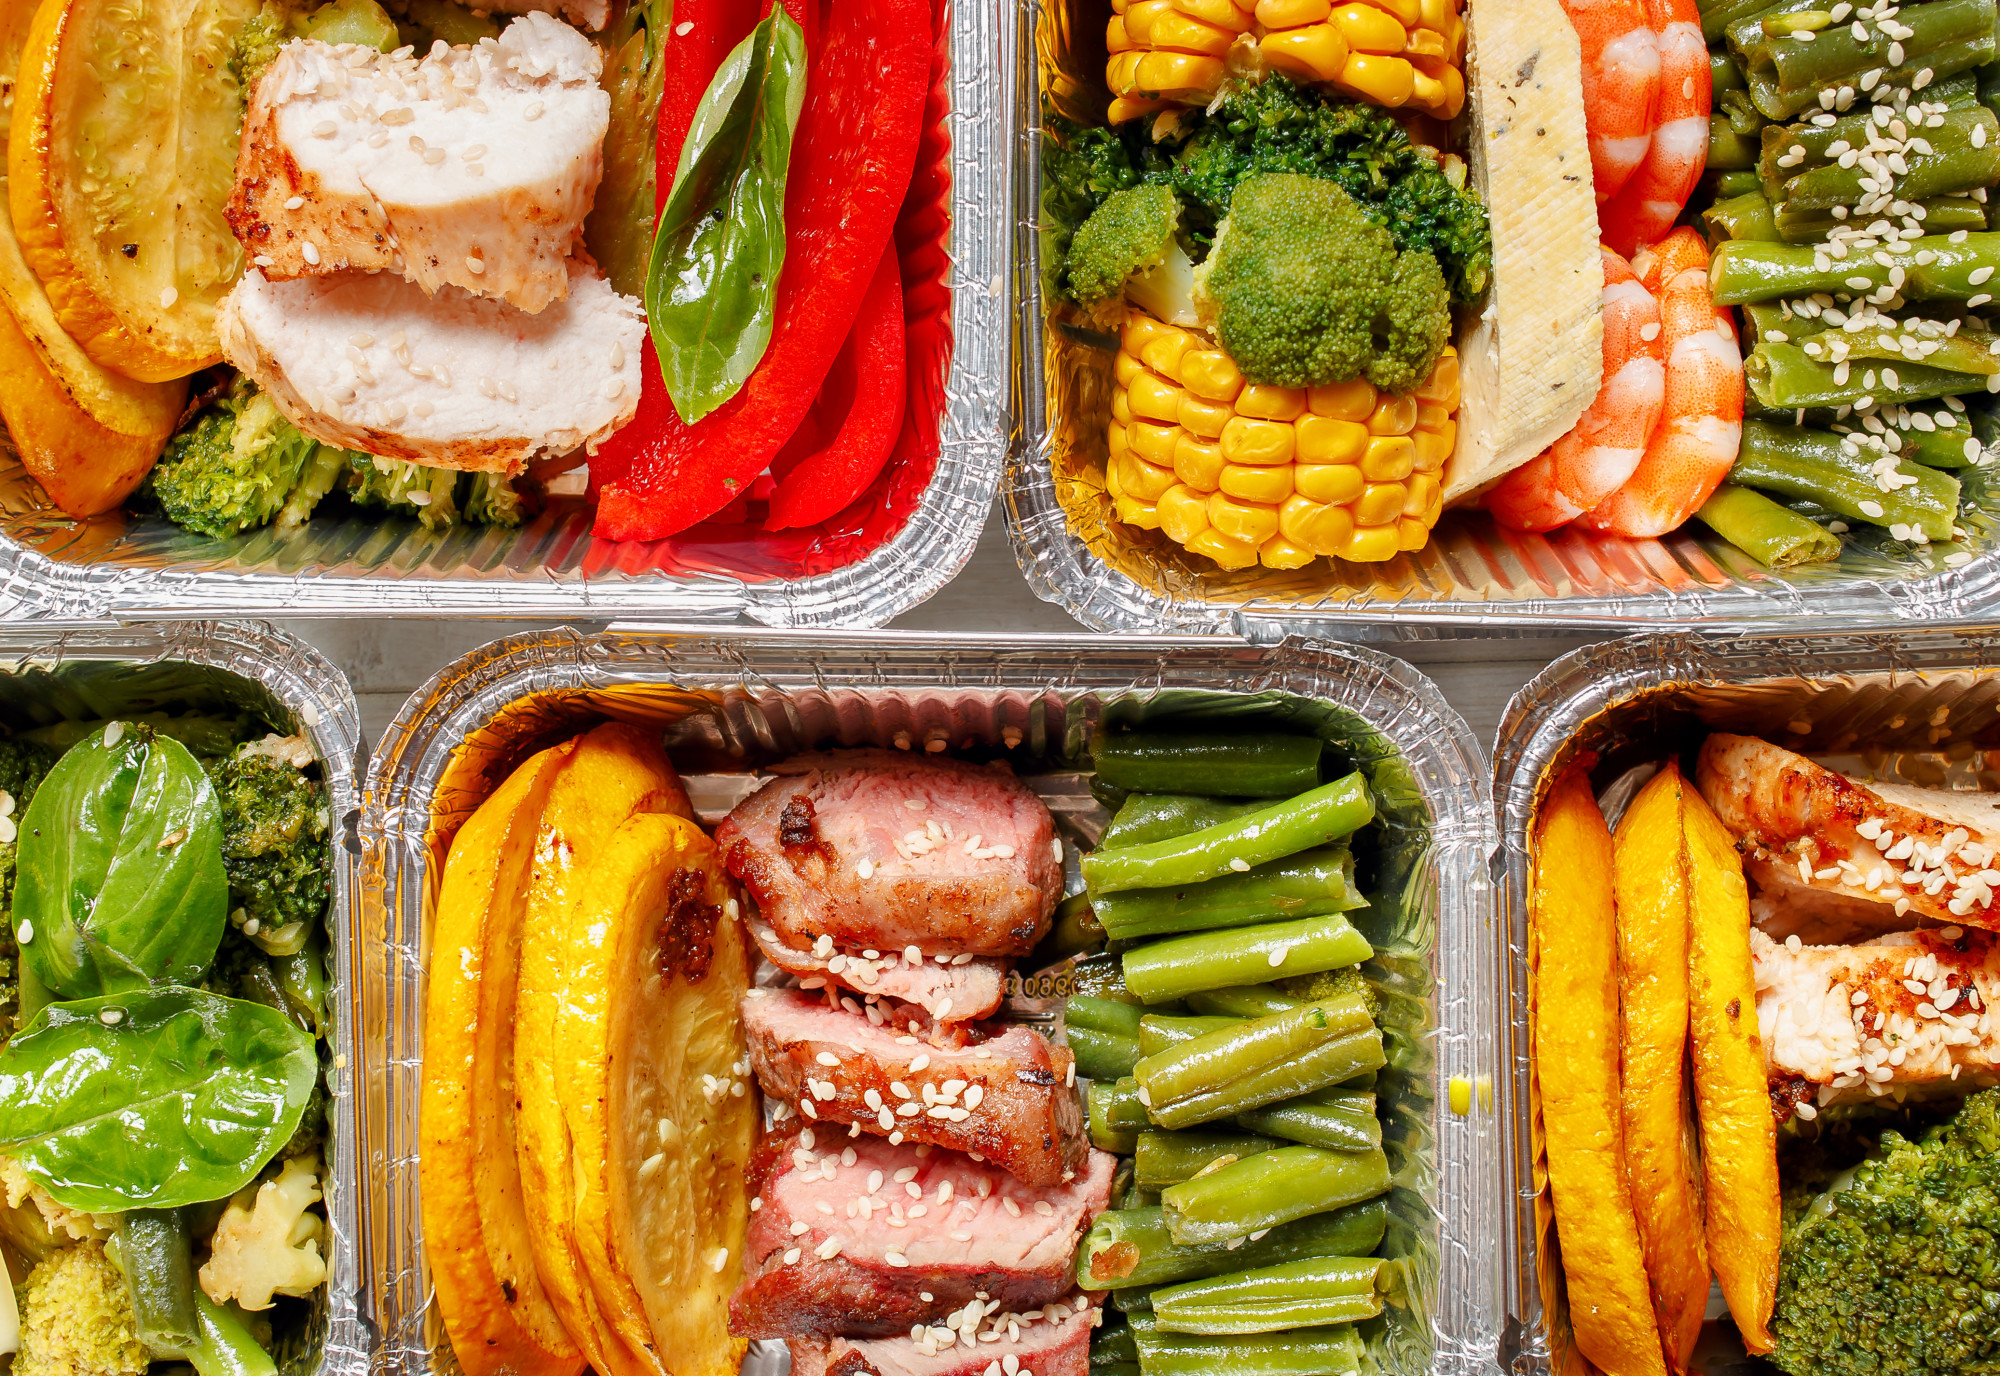 Top 5 Healthy Meal Delivery Services - Banner